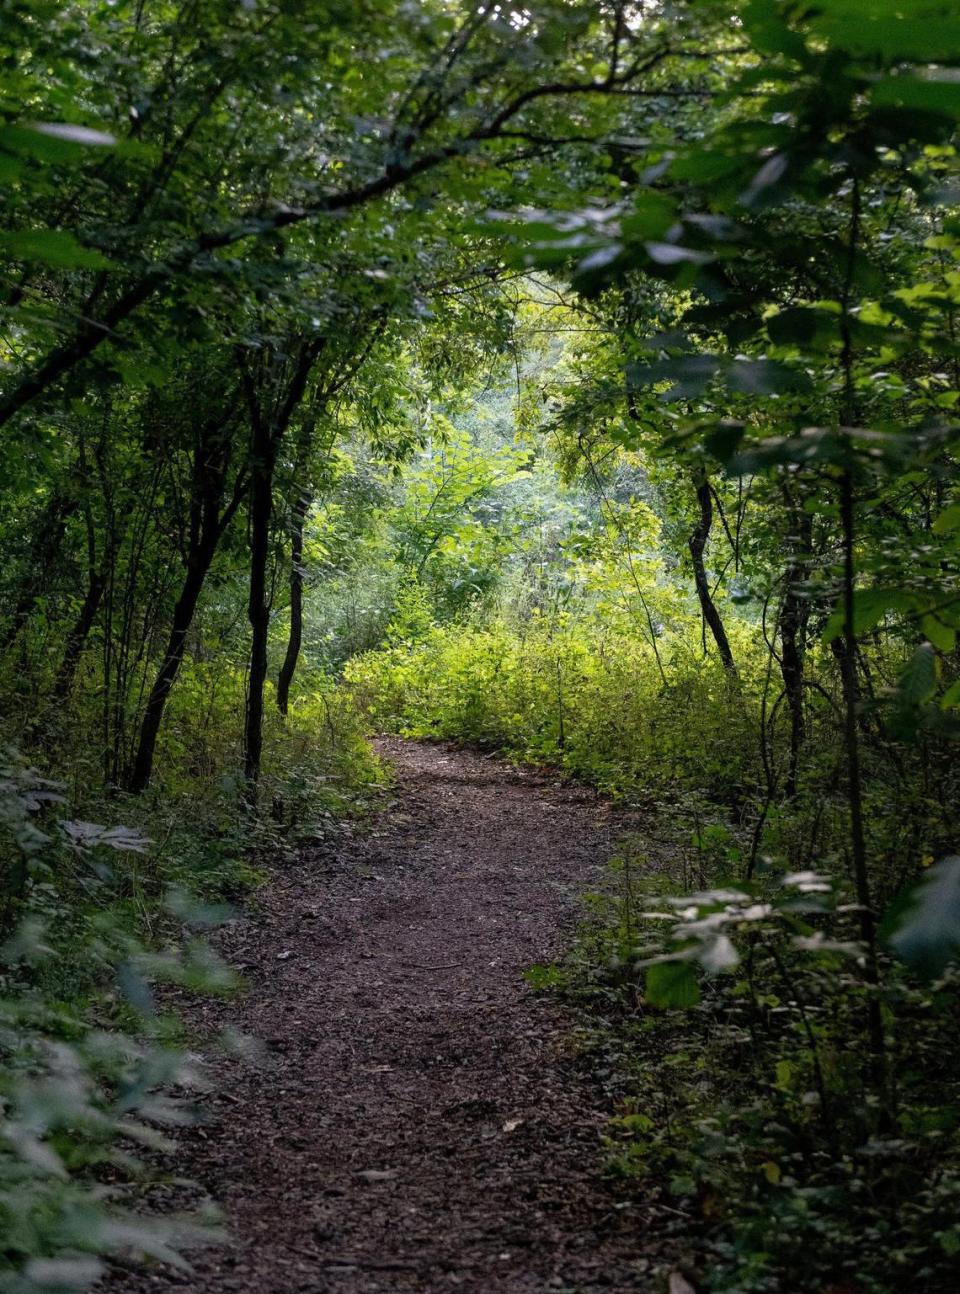 The Old Kate Trail is one of several trails on the Parkville Nature Sanctuary open to the public.